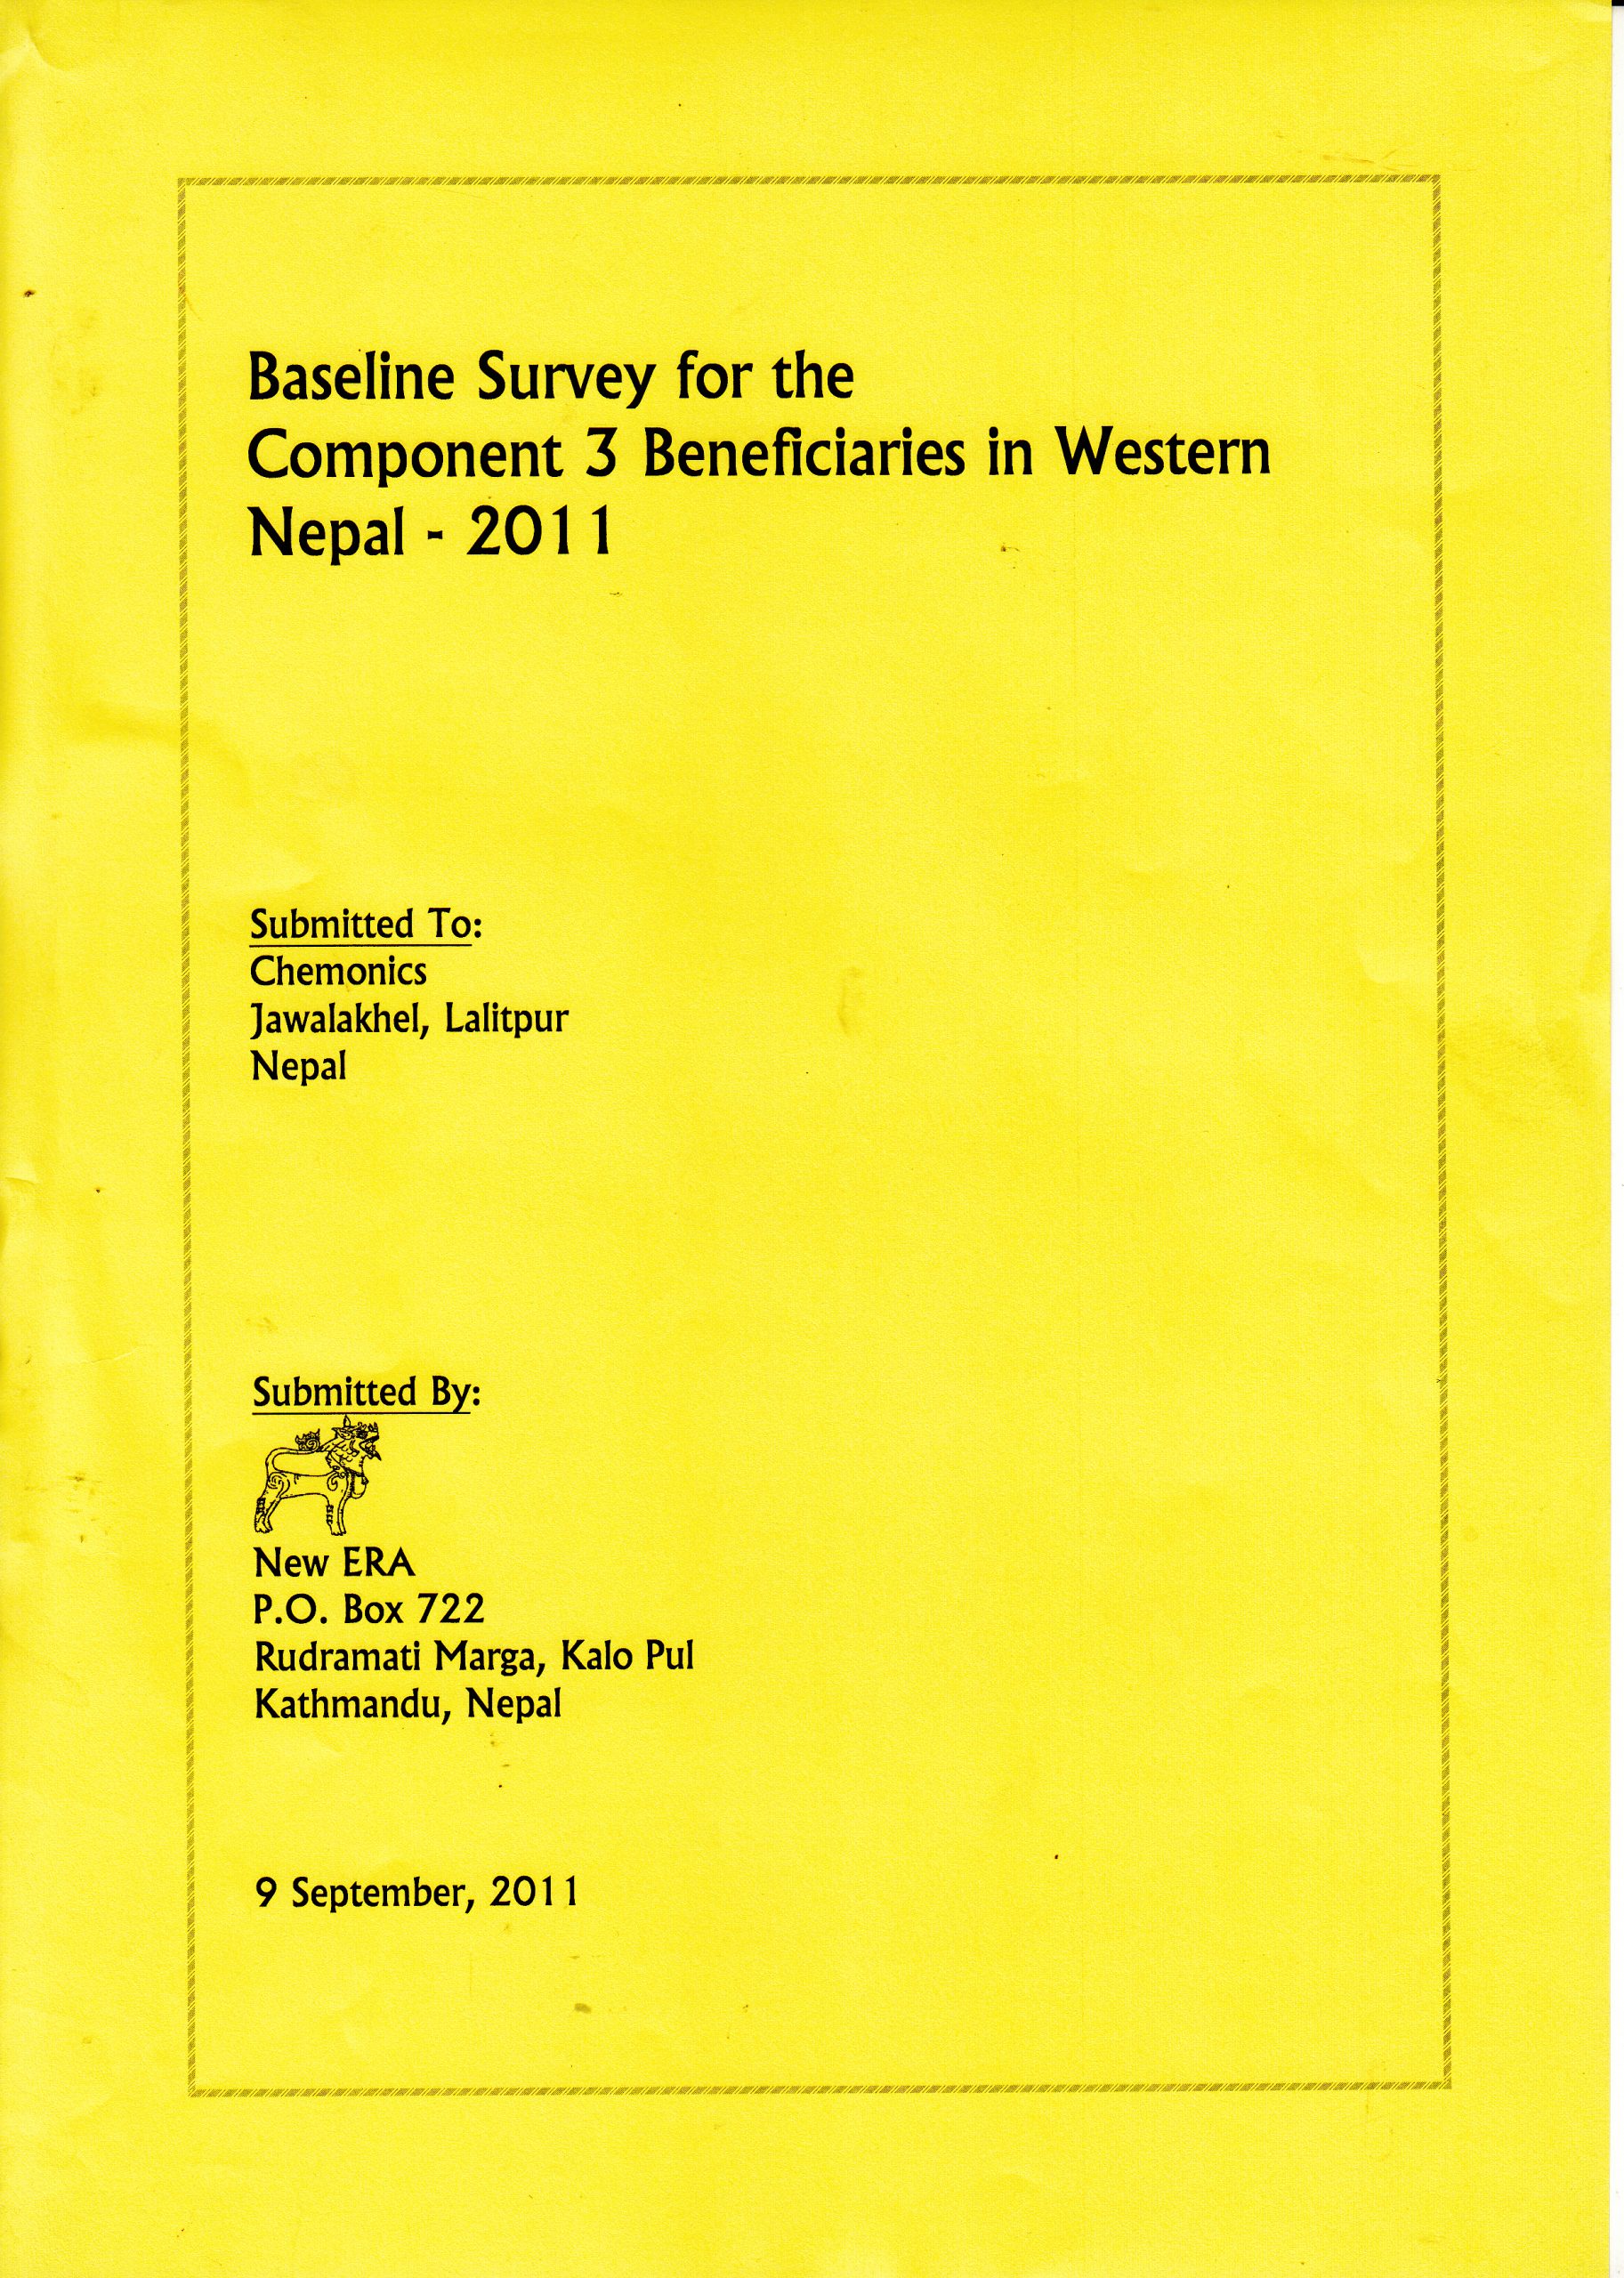 Baseline Survey for the Component 3 Beneficiaries in Western Nepal